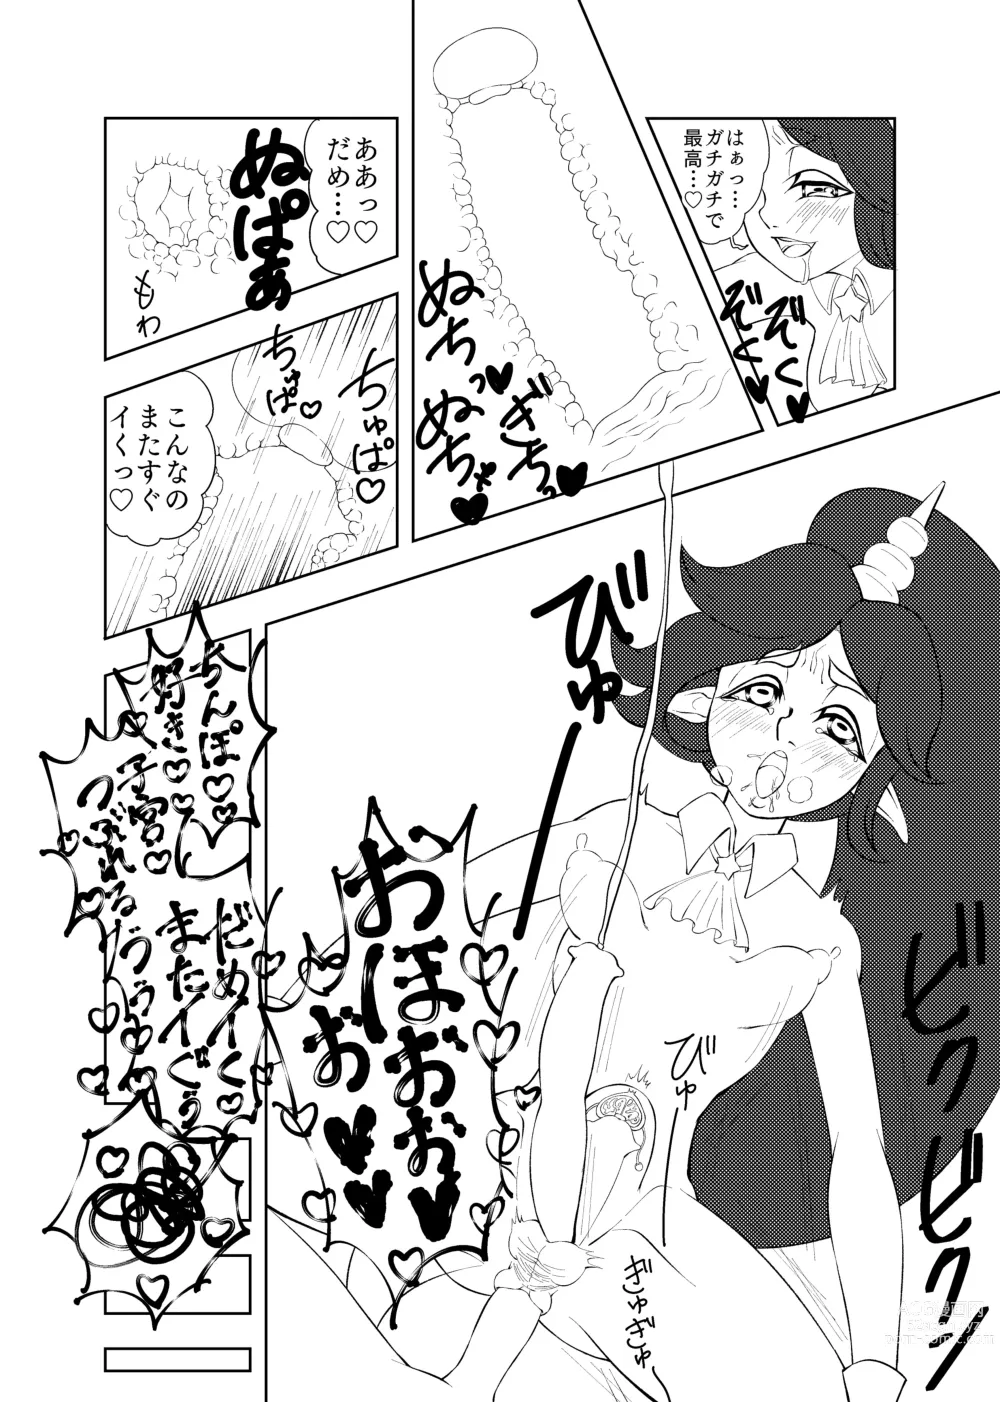 Page 17 of doujinshi Butterfly nebula ｰmirror houseｰ